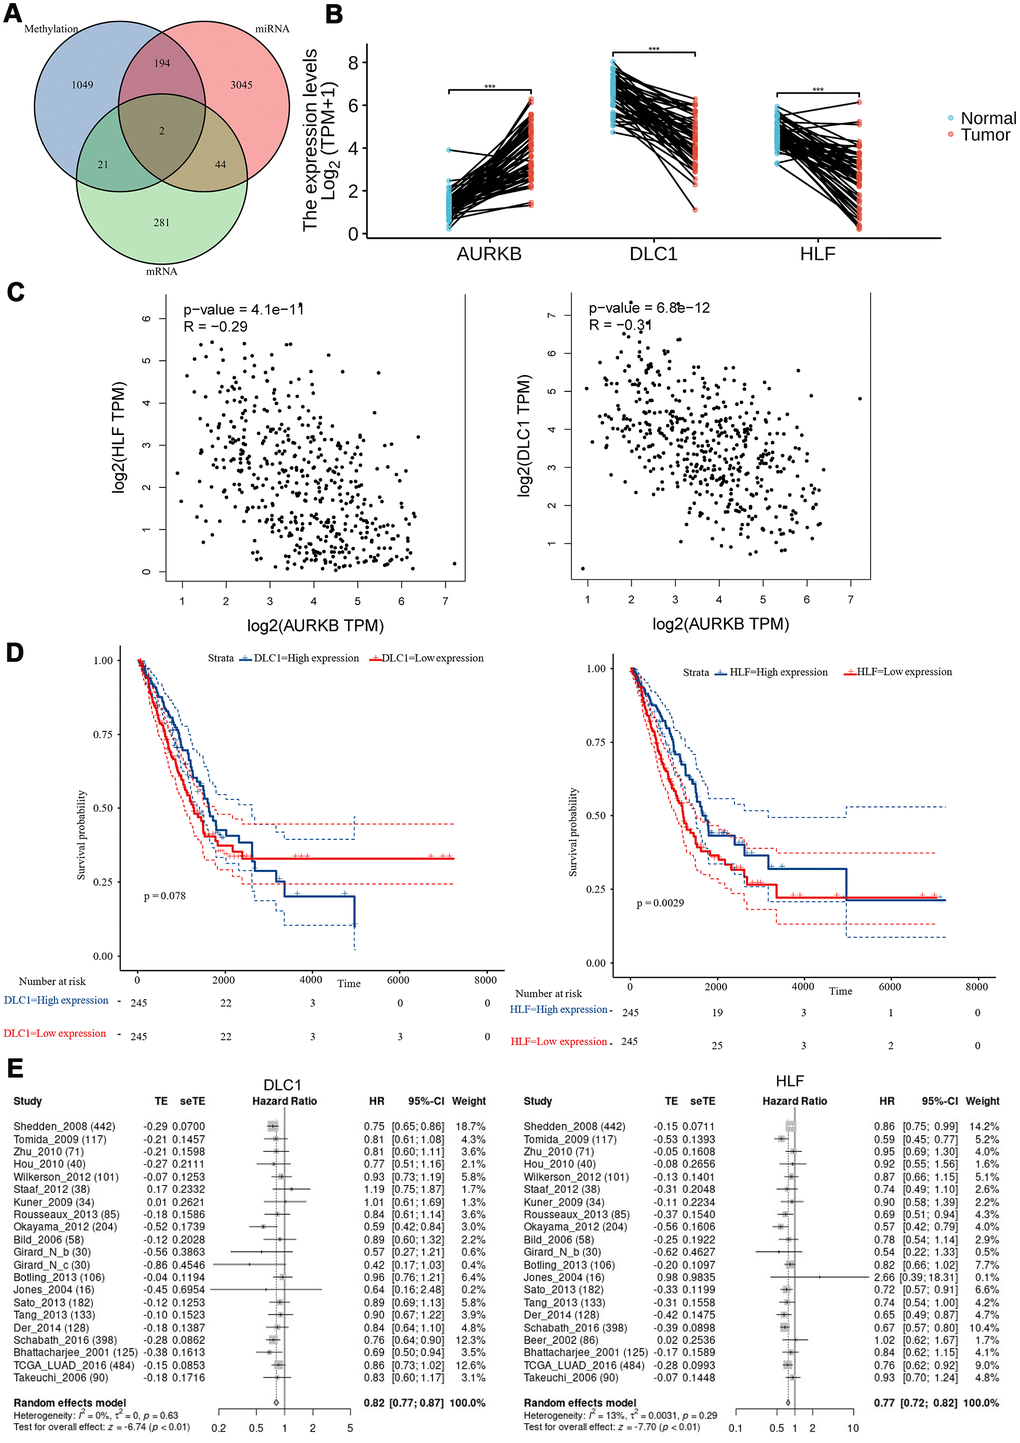 Tumor suppressors (DLC1 and HLF) negatively correlated with AURKB and its associated miRNAs and methylation modification. (A) Venn plot of identified DEGs, differentially expressed microRNAs, and DMRs; (B) the expression levels (Log2(TPM+1)) of AURKB, DLC1, and HLF in paired tumor and adjacent tissues in the TCGA-LUAD cohort. (C) The correlation of HLF or DLC1 with AURKB were analyzed by GEPIA website (HLF: R = -0.29, p = 4.1e-11; DLC1: R = -0.31, p = 5.8e-12). (D) Low expression of DLC1 or HLF led to poor overall survival in the TCGA-LUAD cohort (p = 0.078, 0.0029, respectively). (E) Meta-analysis of DLC1 or HLF expression in the prediction of overall survival in lung adenocarcinoma patients from different datasets by lung cancer explorer (LCE).